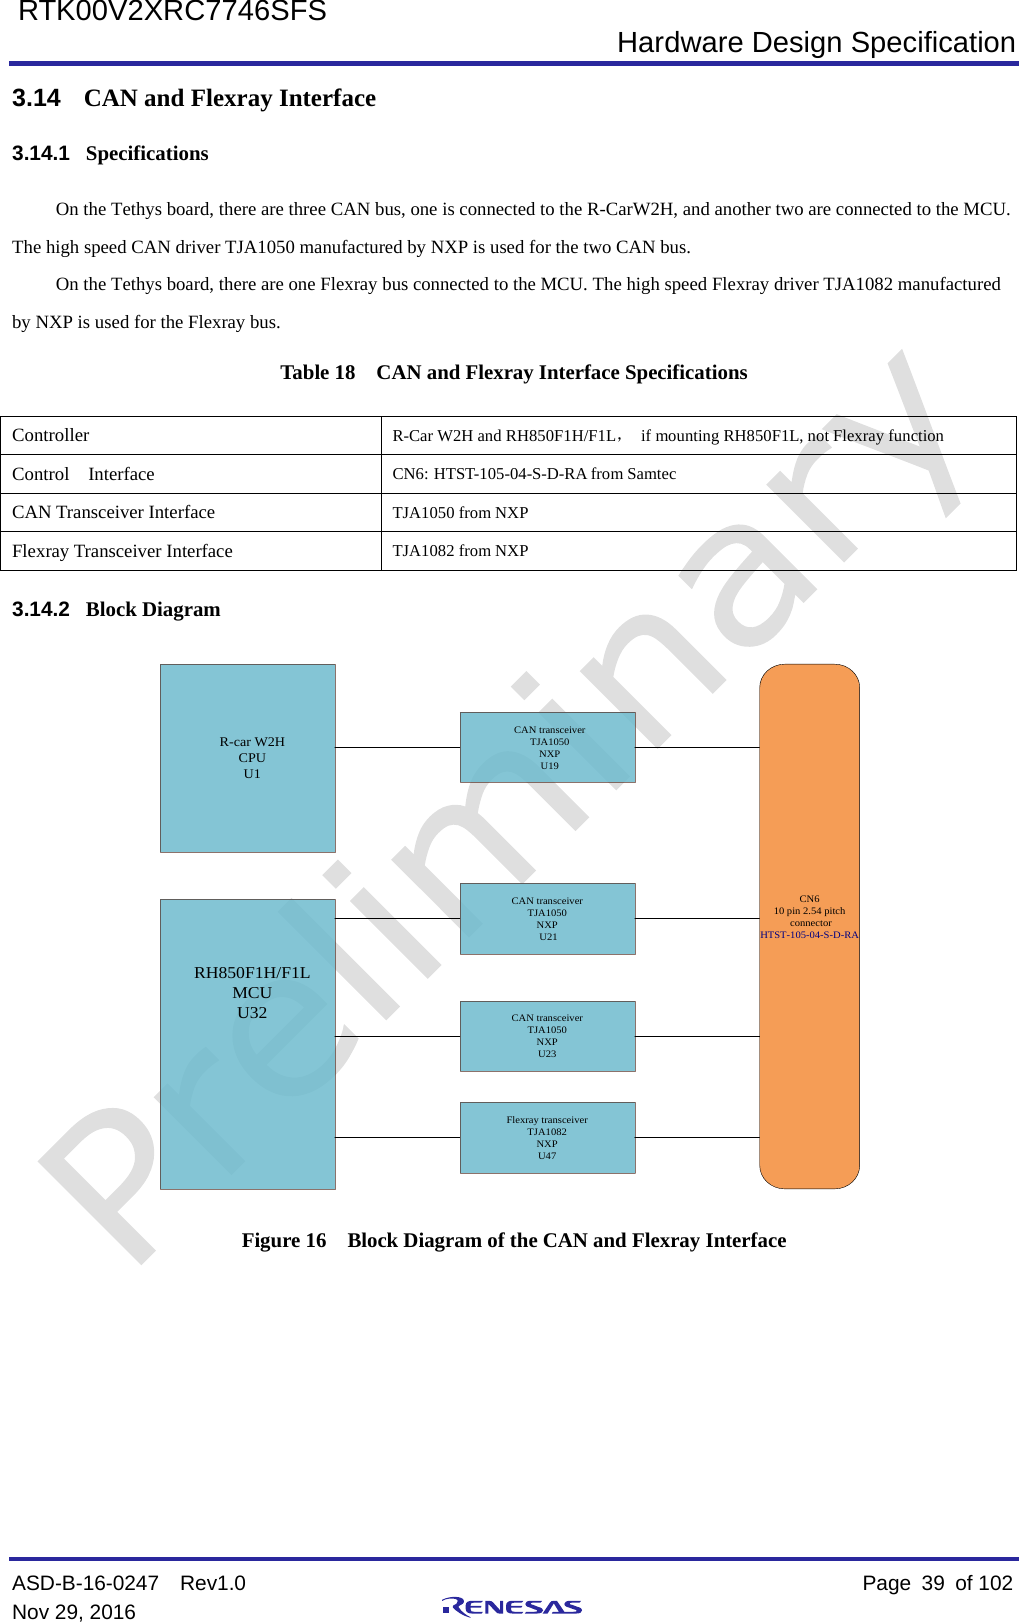  Hardware Design Specification ASD-B-16-0247  Rev1.0    Page  39 of 102 Nov 29, 2016     RTK00V2XRC7746SFS 3.14  CAN and Flexray Interface 3.14.1 Specifications On the Tethys board, there are three CAN bus, one is connected to the R-CarW2H, and another two are connected to the MCU. The high speed CAN driver TJA1050 manufactured by NXP is used for the two CAN bus. On the Tethys board, there are one Flexray bus connected to the MCU. The high speed Flexray driver TJA1082 manufactured by NXP is used for the Flexray bus. Table 18  CAN and Flexray Interface Specifications Controller  R-Car W2H and RH850F1H/F1L， if mounting RH850F1L, not Flexray function Control  Interface  CN6: HTST-105-04-S-D-RA from Samtec CAN Transceiver Interface TJA1050 from NXP Flexray Transceiver Interface TJA1082 from NXP 3.14.2 Block Diagram CAN transceiverTJA1050NXP U19R-car W2HCPUU1CAN transceiverTJA1050NXP  U21RH850F1H/F1LMCUU32CAN transceiverTJA1050NXPU23CN610 pin 2.54 pitch connectorHTST-105-04-S-D-RAFlexray transceiverTJA1082NXPU47 Figure 16  Block Diagram of the CAN and Flexray Interface       